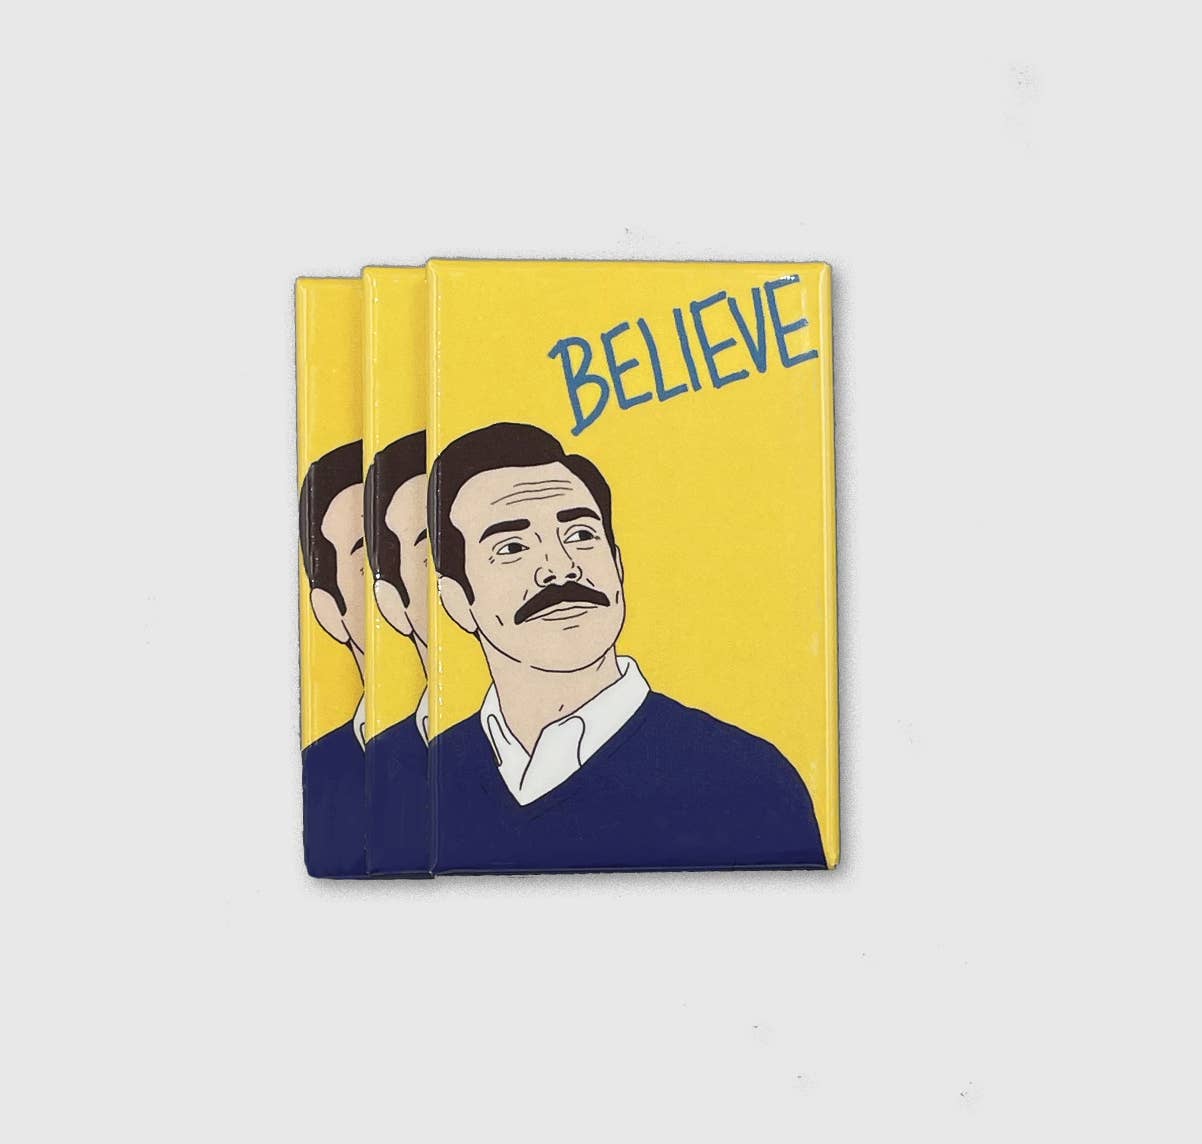 Ted Believe Magnet